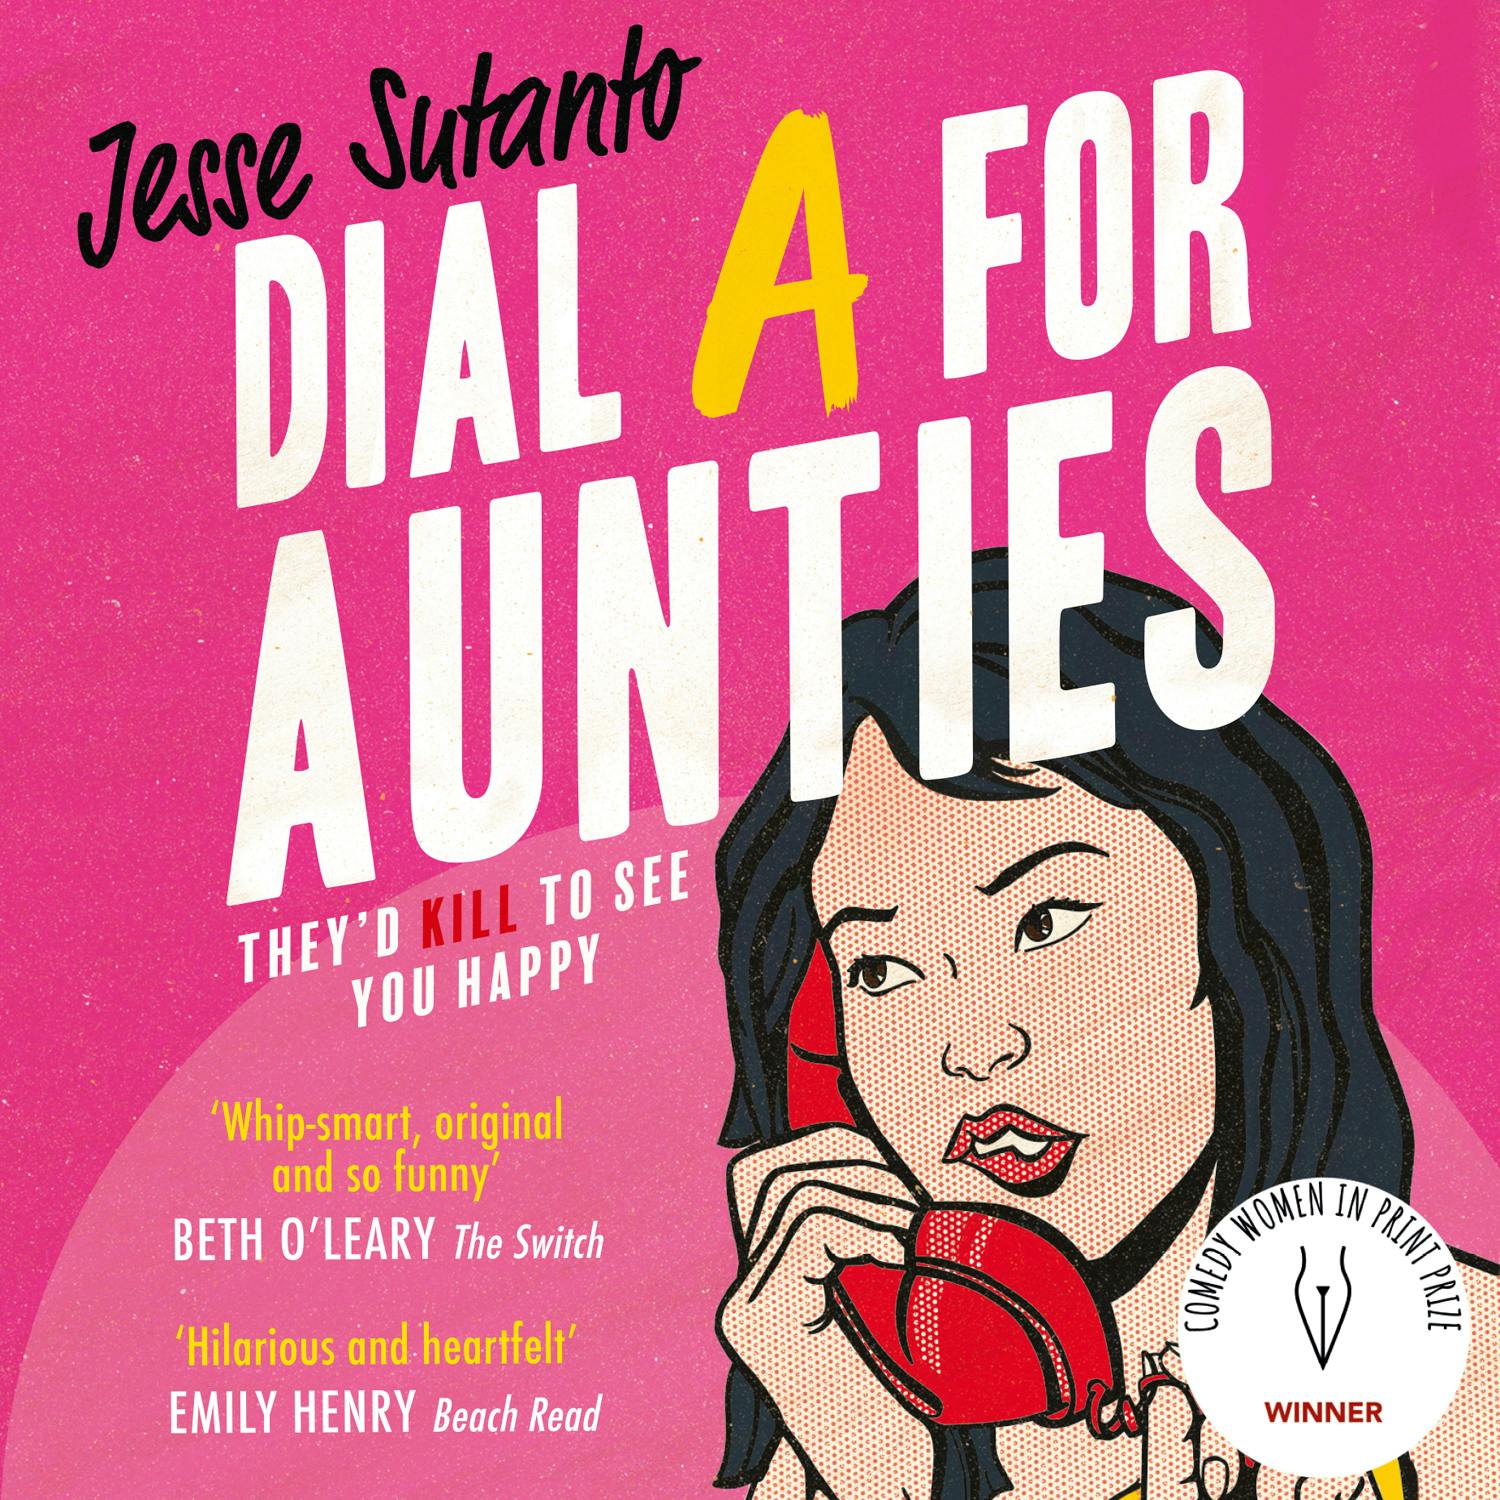 Dial A For Aunties - Jesse Sutanto